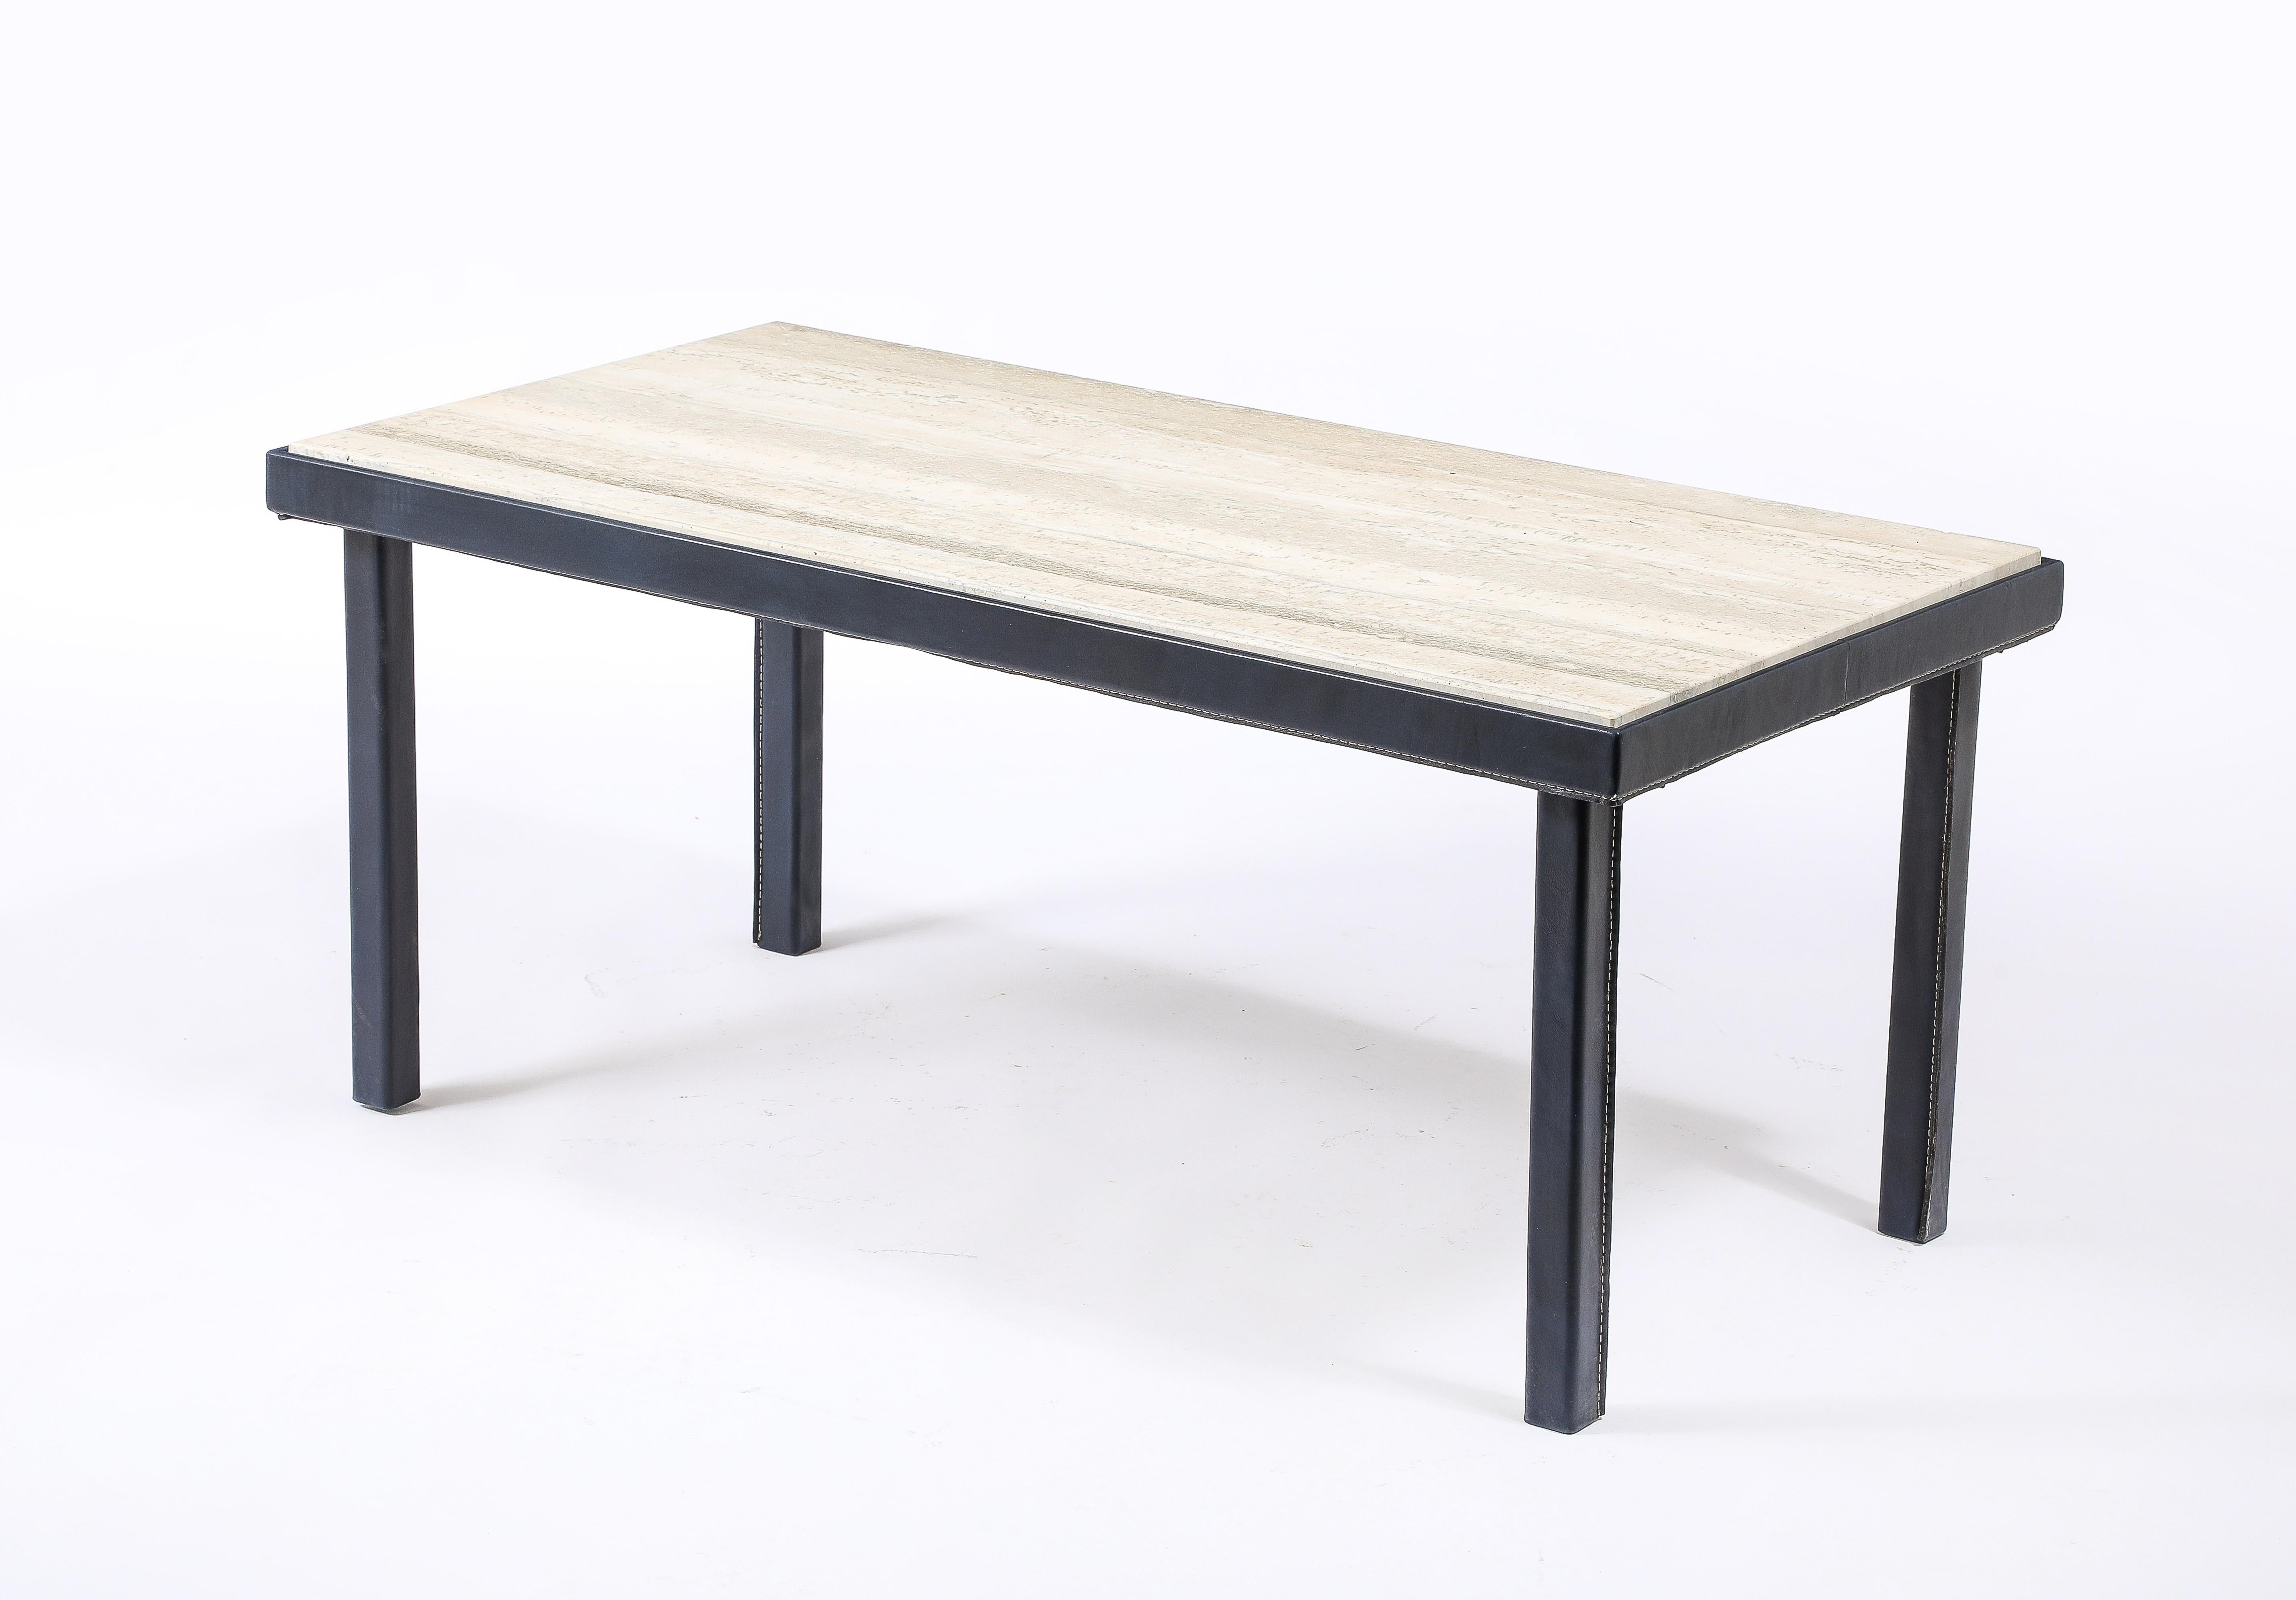 Jacques Adnet Stitched Blue Leather & Travertine Coffee Table, France 1950's For Sale 6